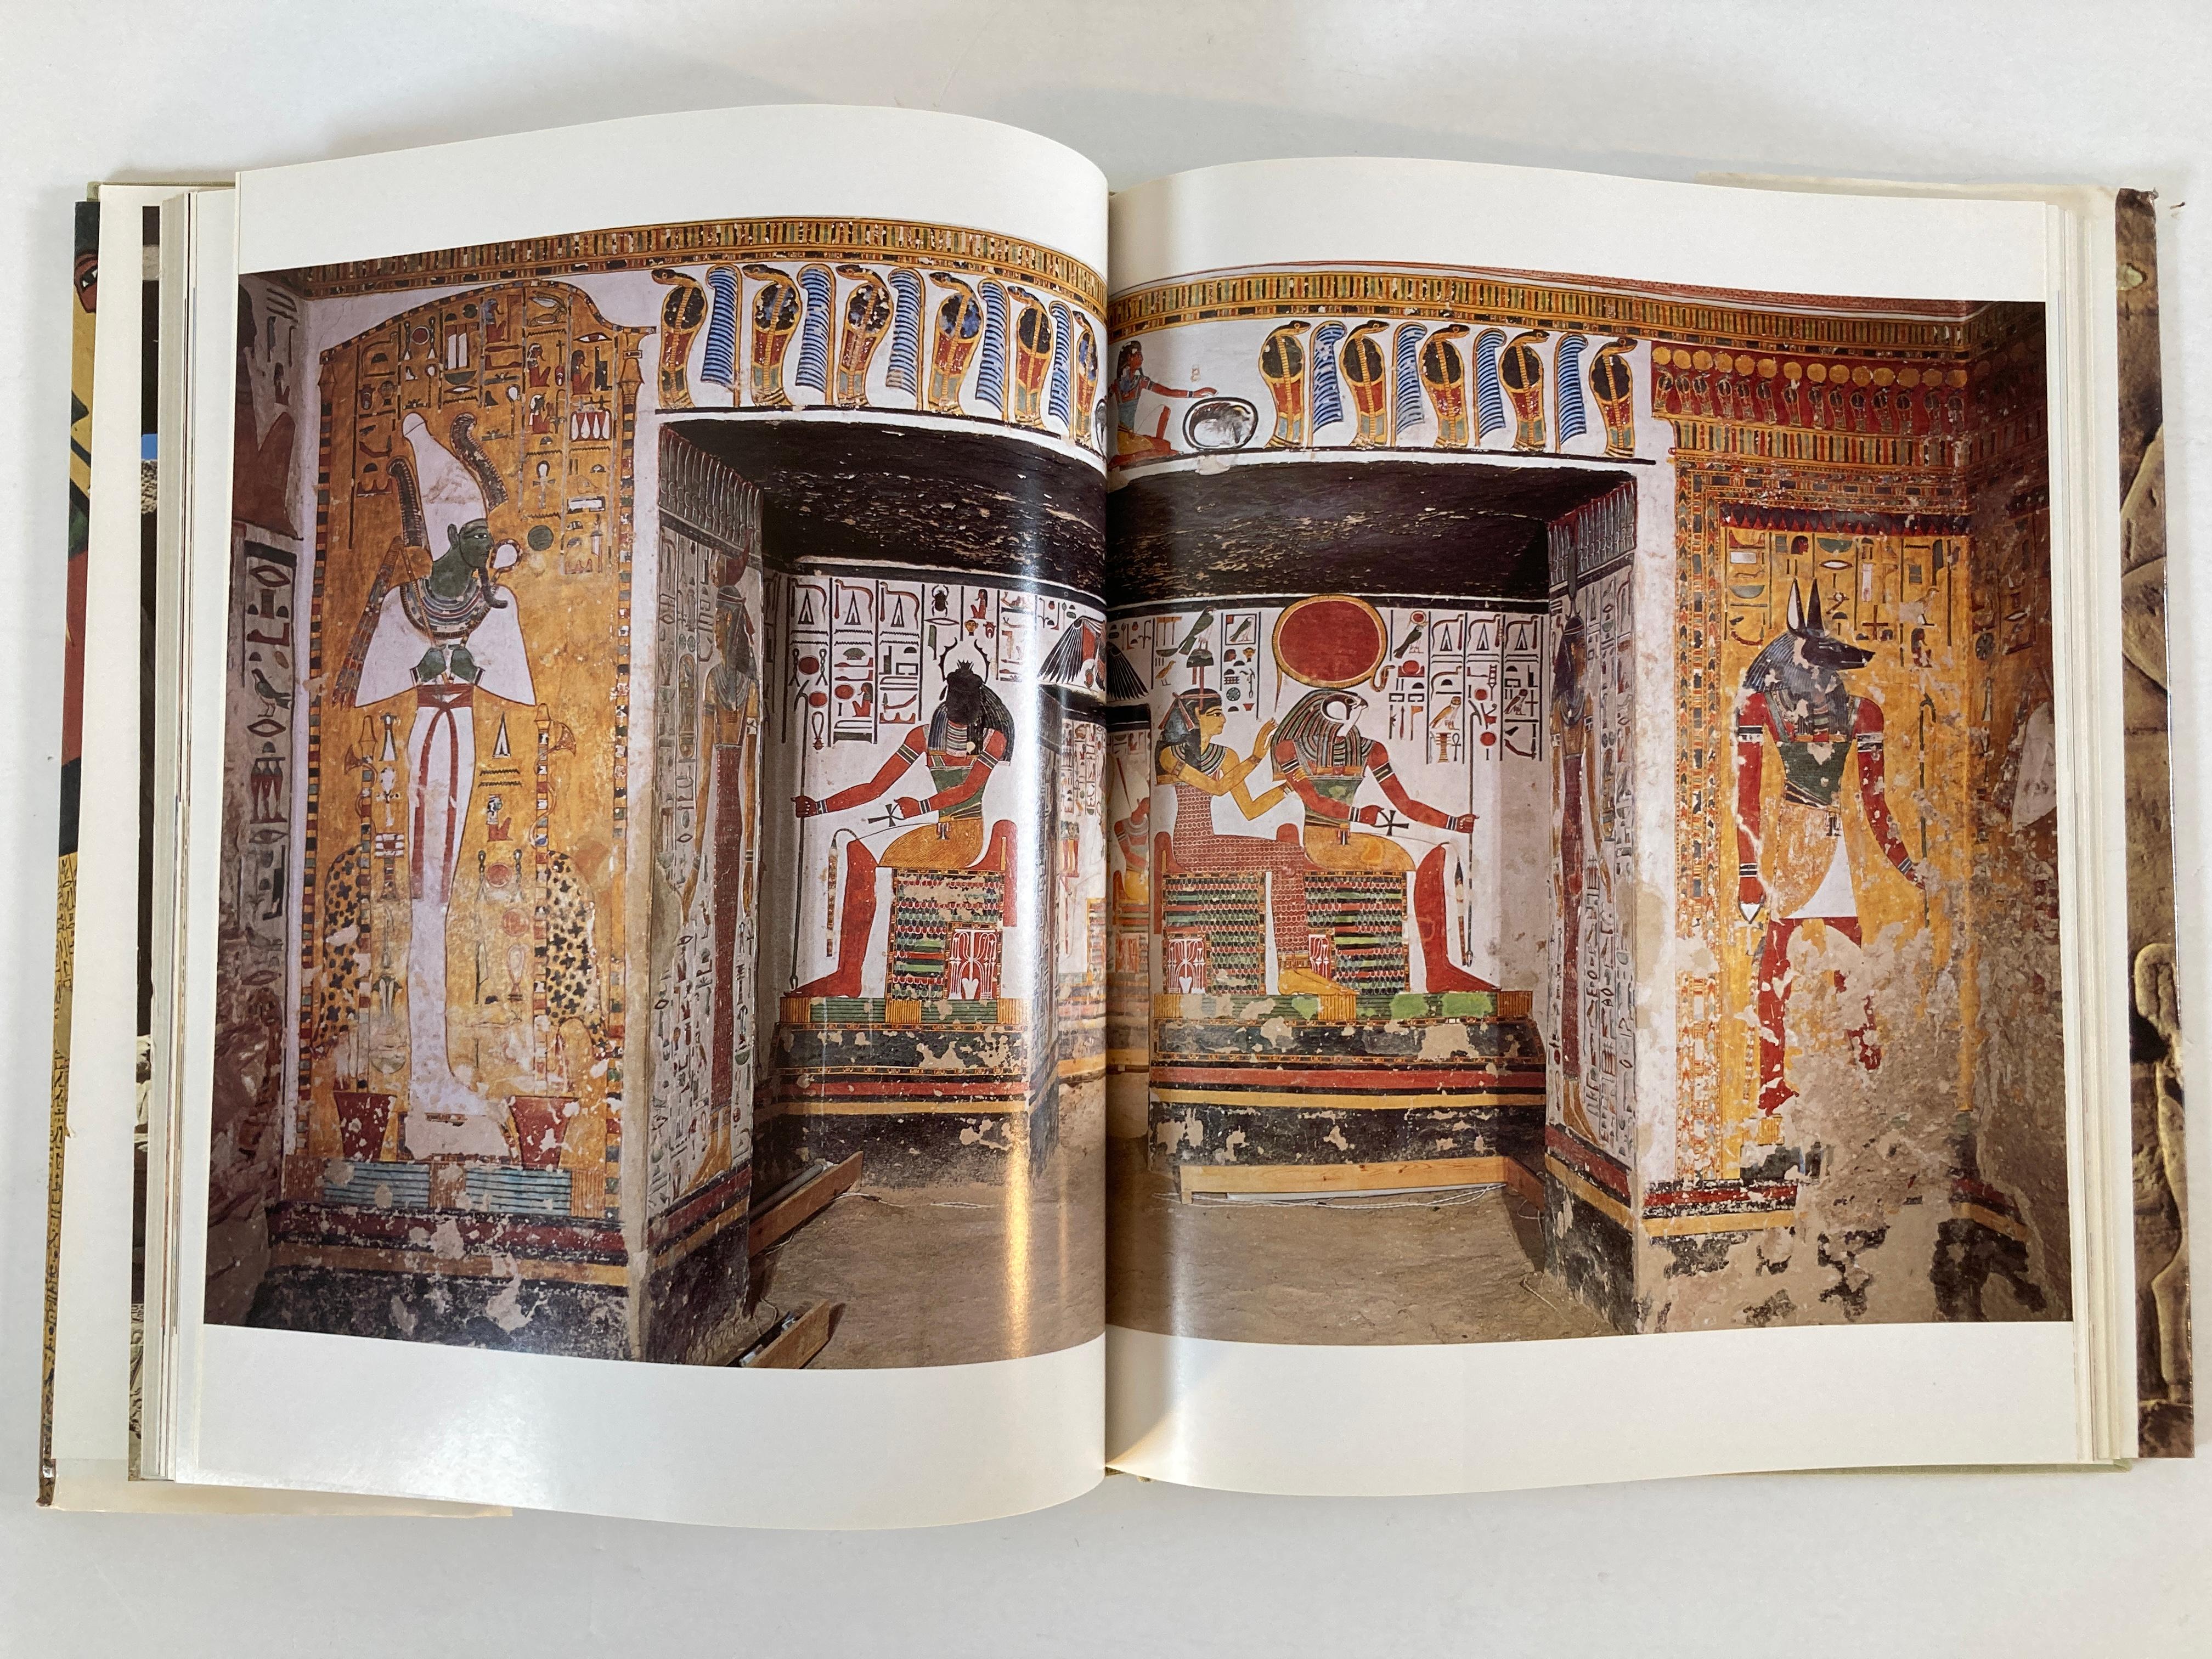 Treasures of the Nile: Art of the Temples and Tombs of Egypt Hardcover Book 3